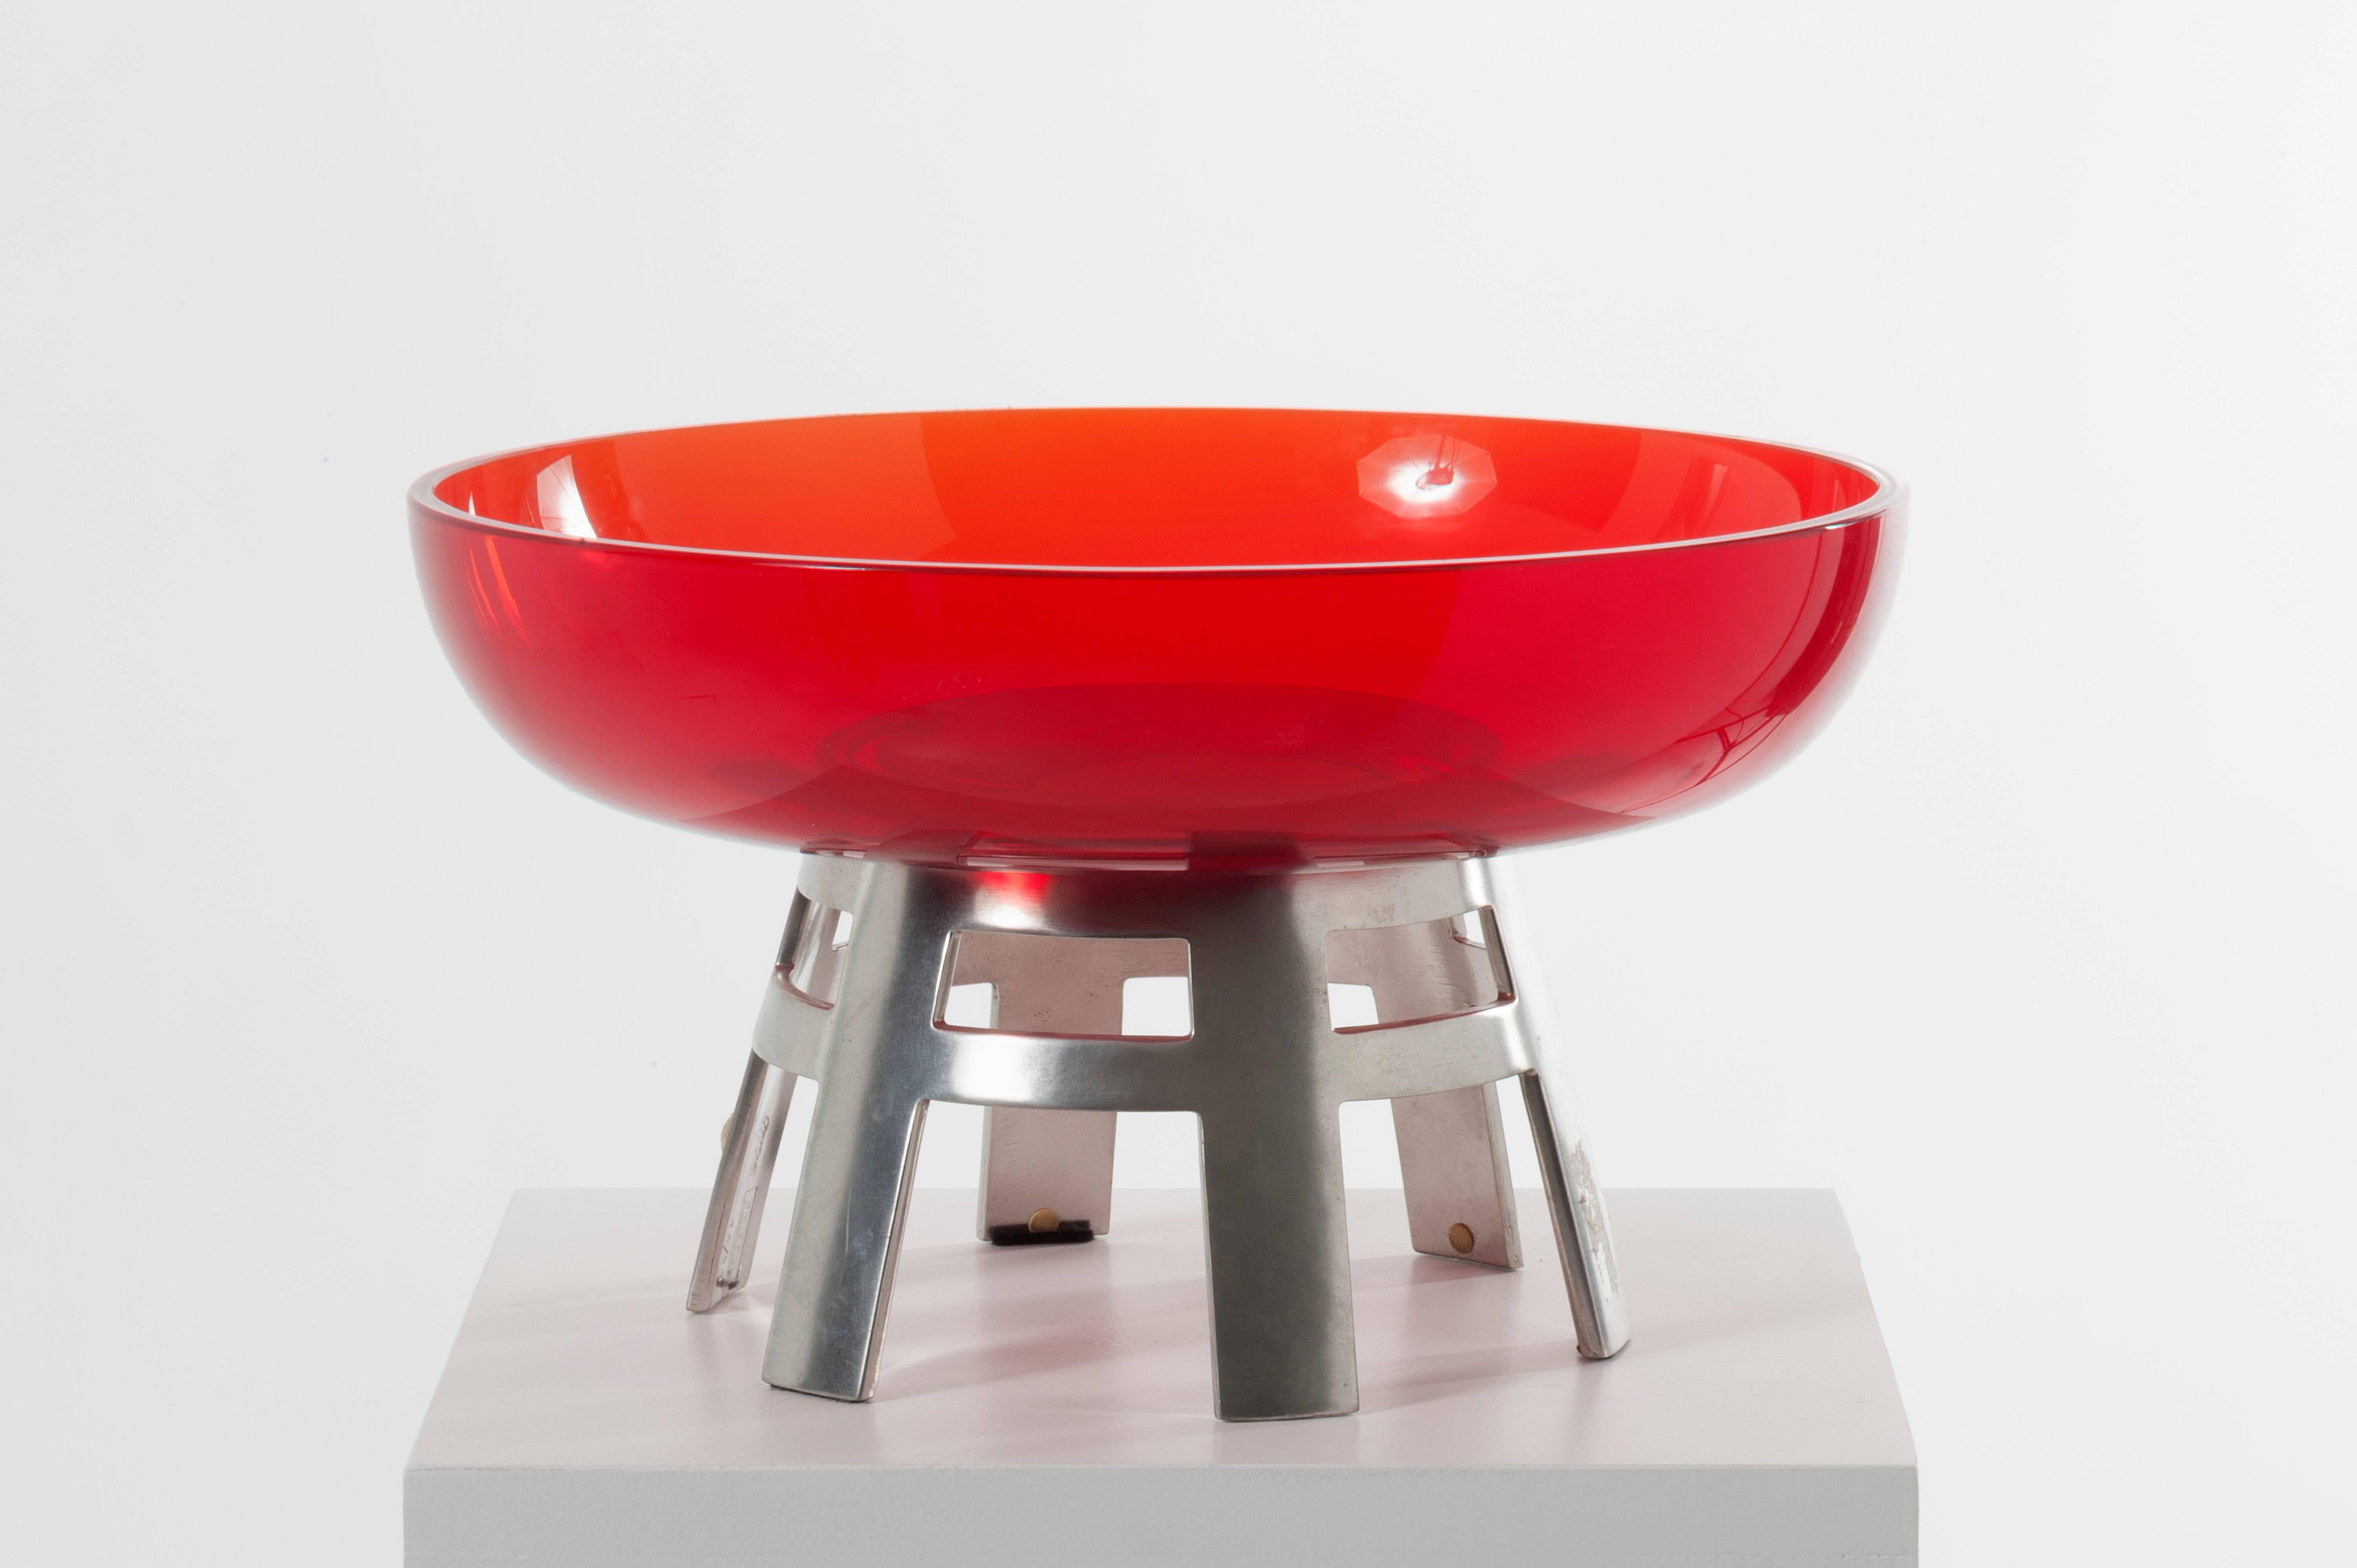 Vintage table centerpiece made of a perforated metal base raised on six feet and a red glass bowl, signed No. 34/99
by Ettore Sottsass manufactured by Numa, Italy, circa 1980
Measures: 12.6 in plate diameter - 8.26 in total height
Diameter coupe